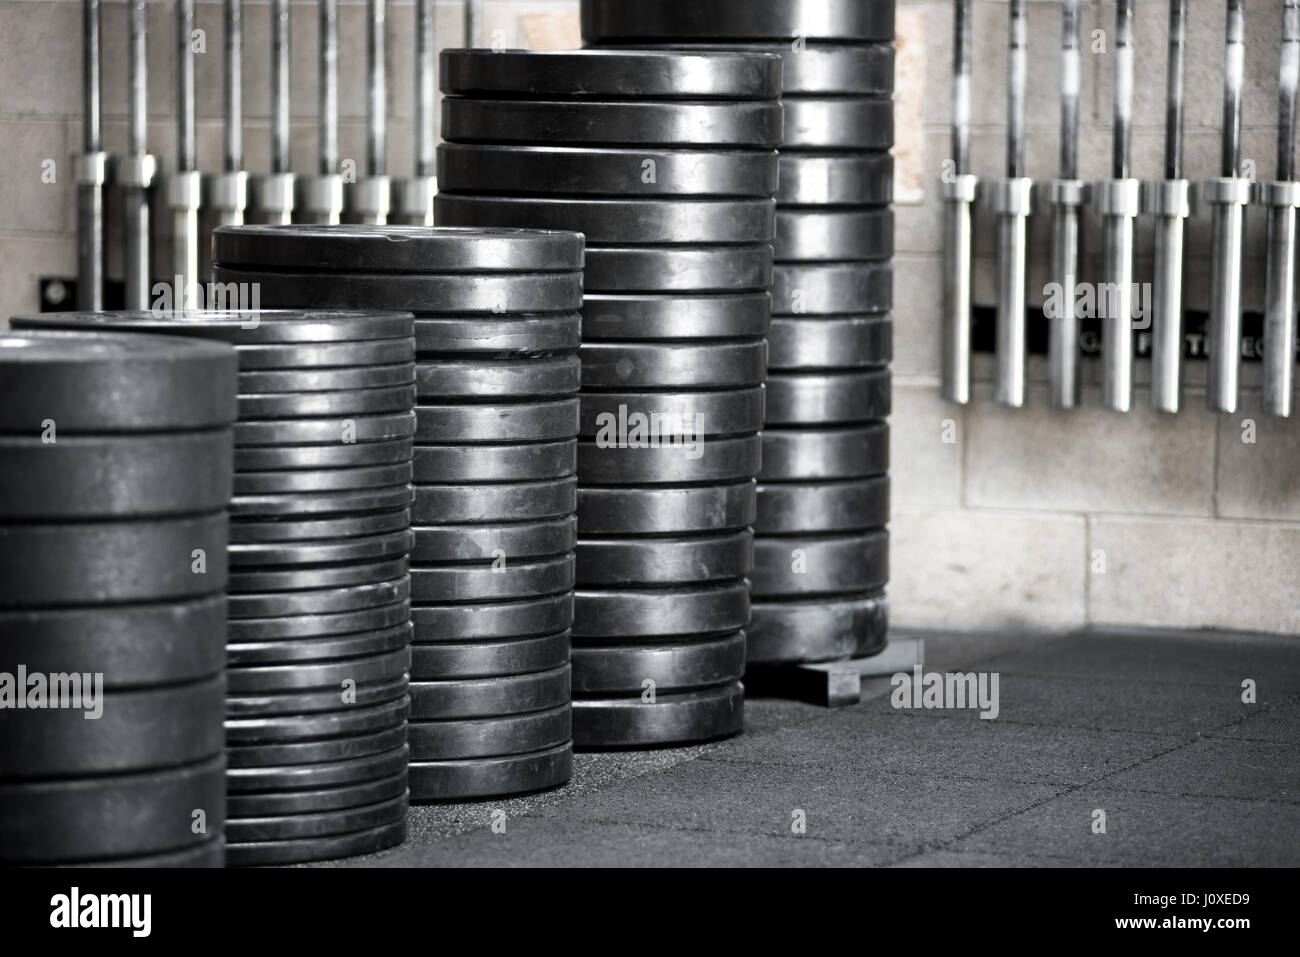 Stacks of assorted sized weights for barbells in a gym in a close up greyscale image with copy space Stock Photo